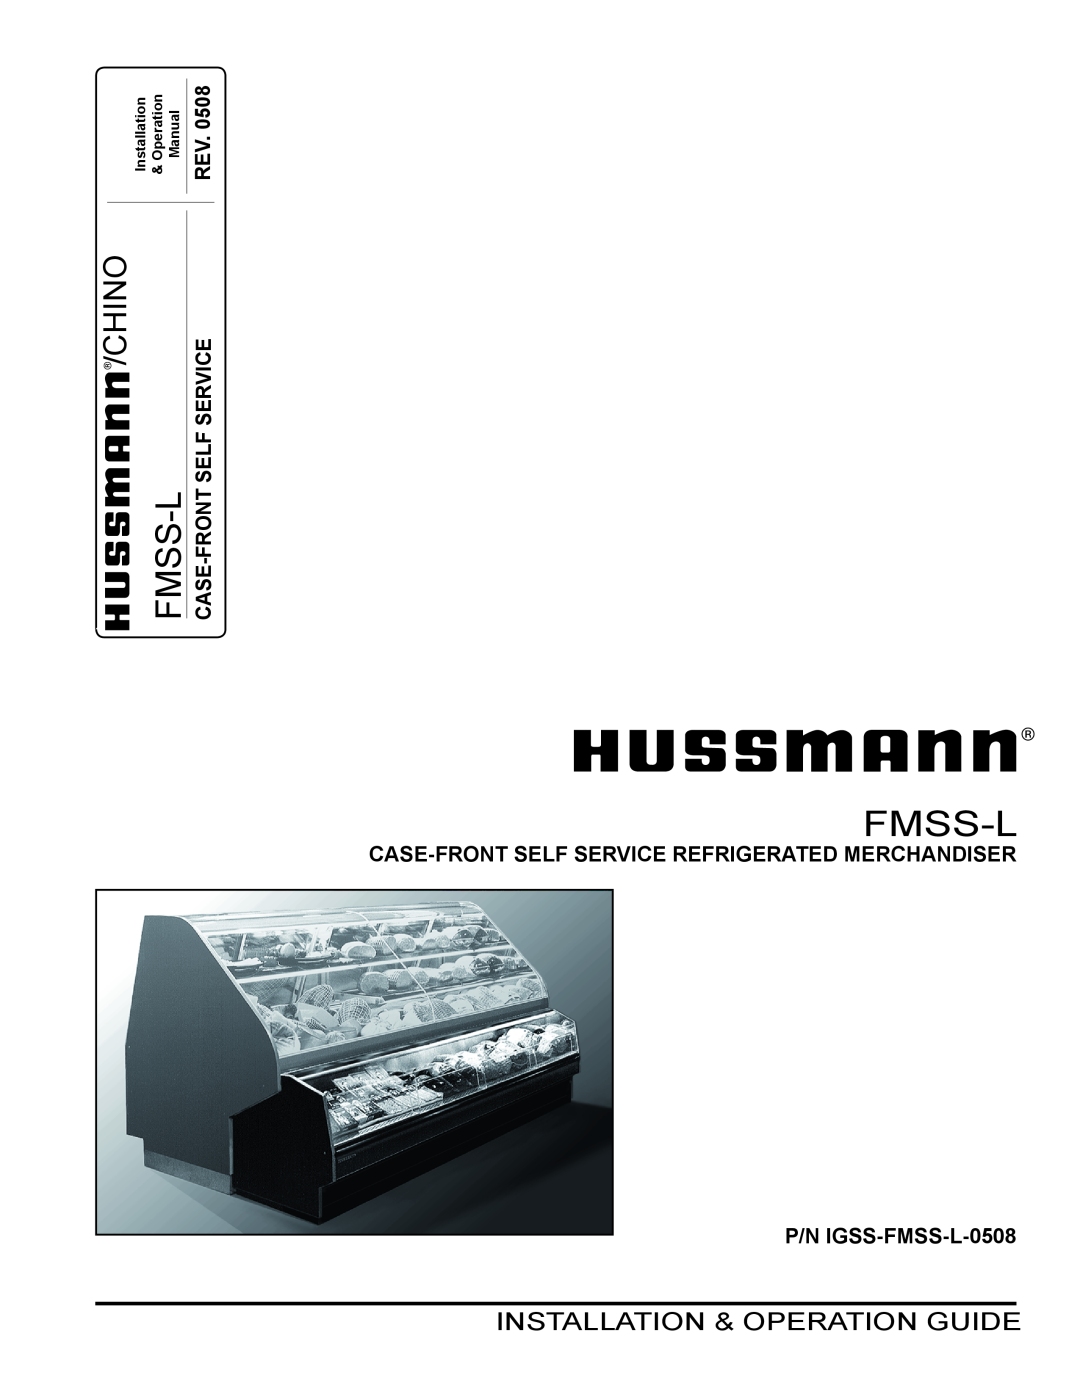 hussman operation manual Chino, Case-front Self Service Refrigerated Merchandiser, P/N IGSS-FMSS-L-0508, Fmss-L, Manual 